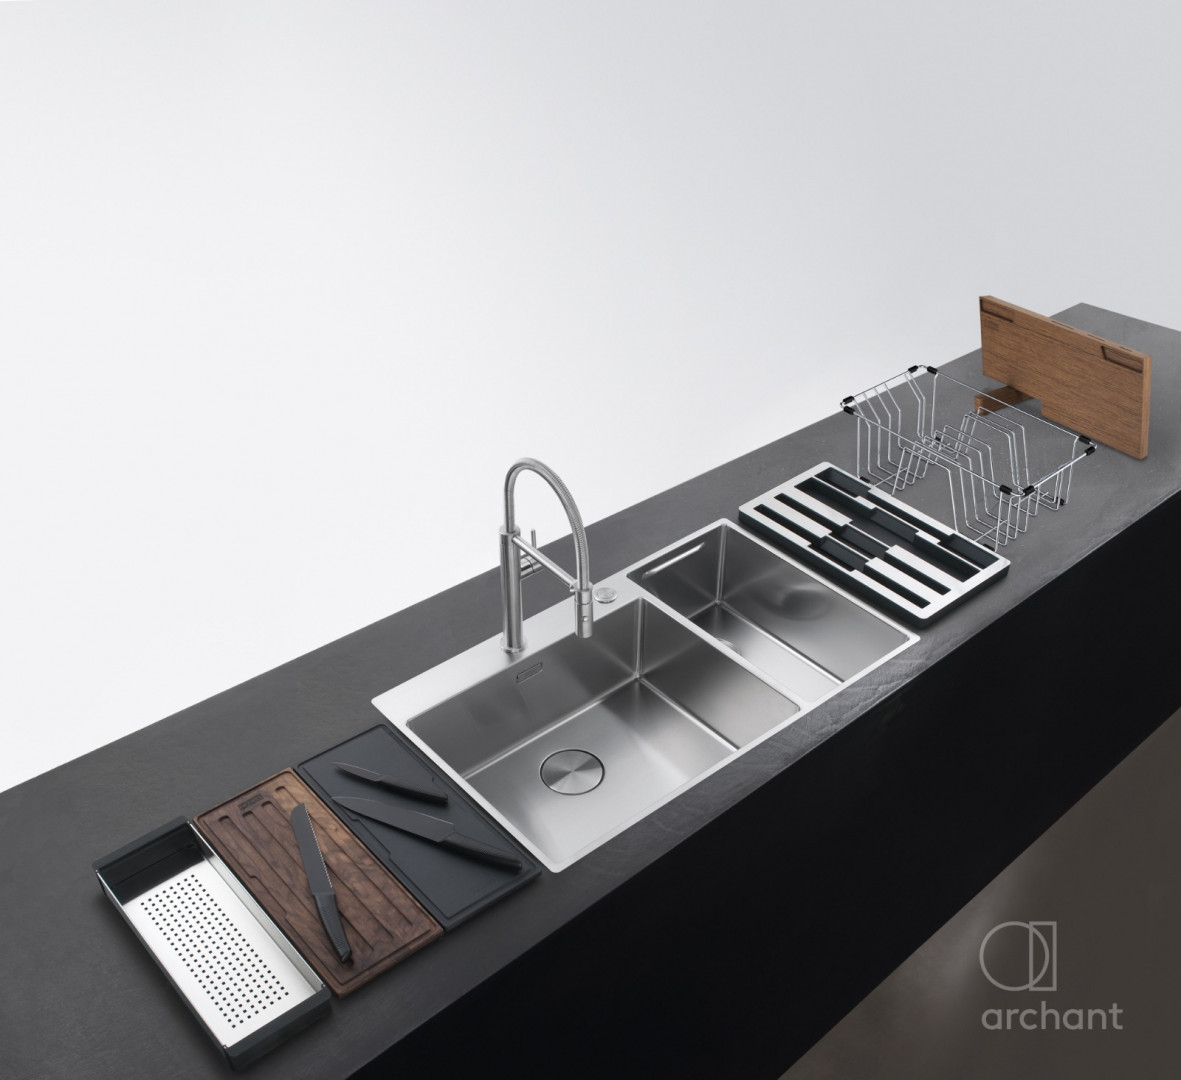 Box Centre - Archant Sink from Archant